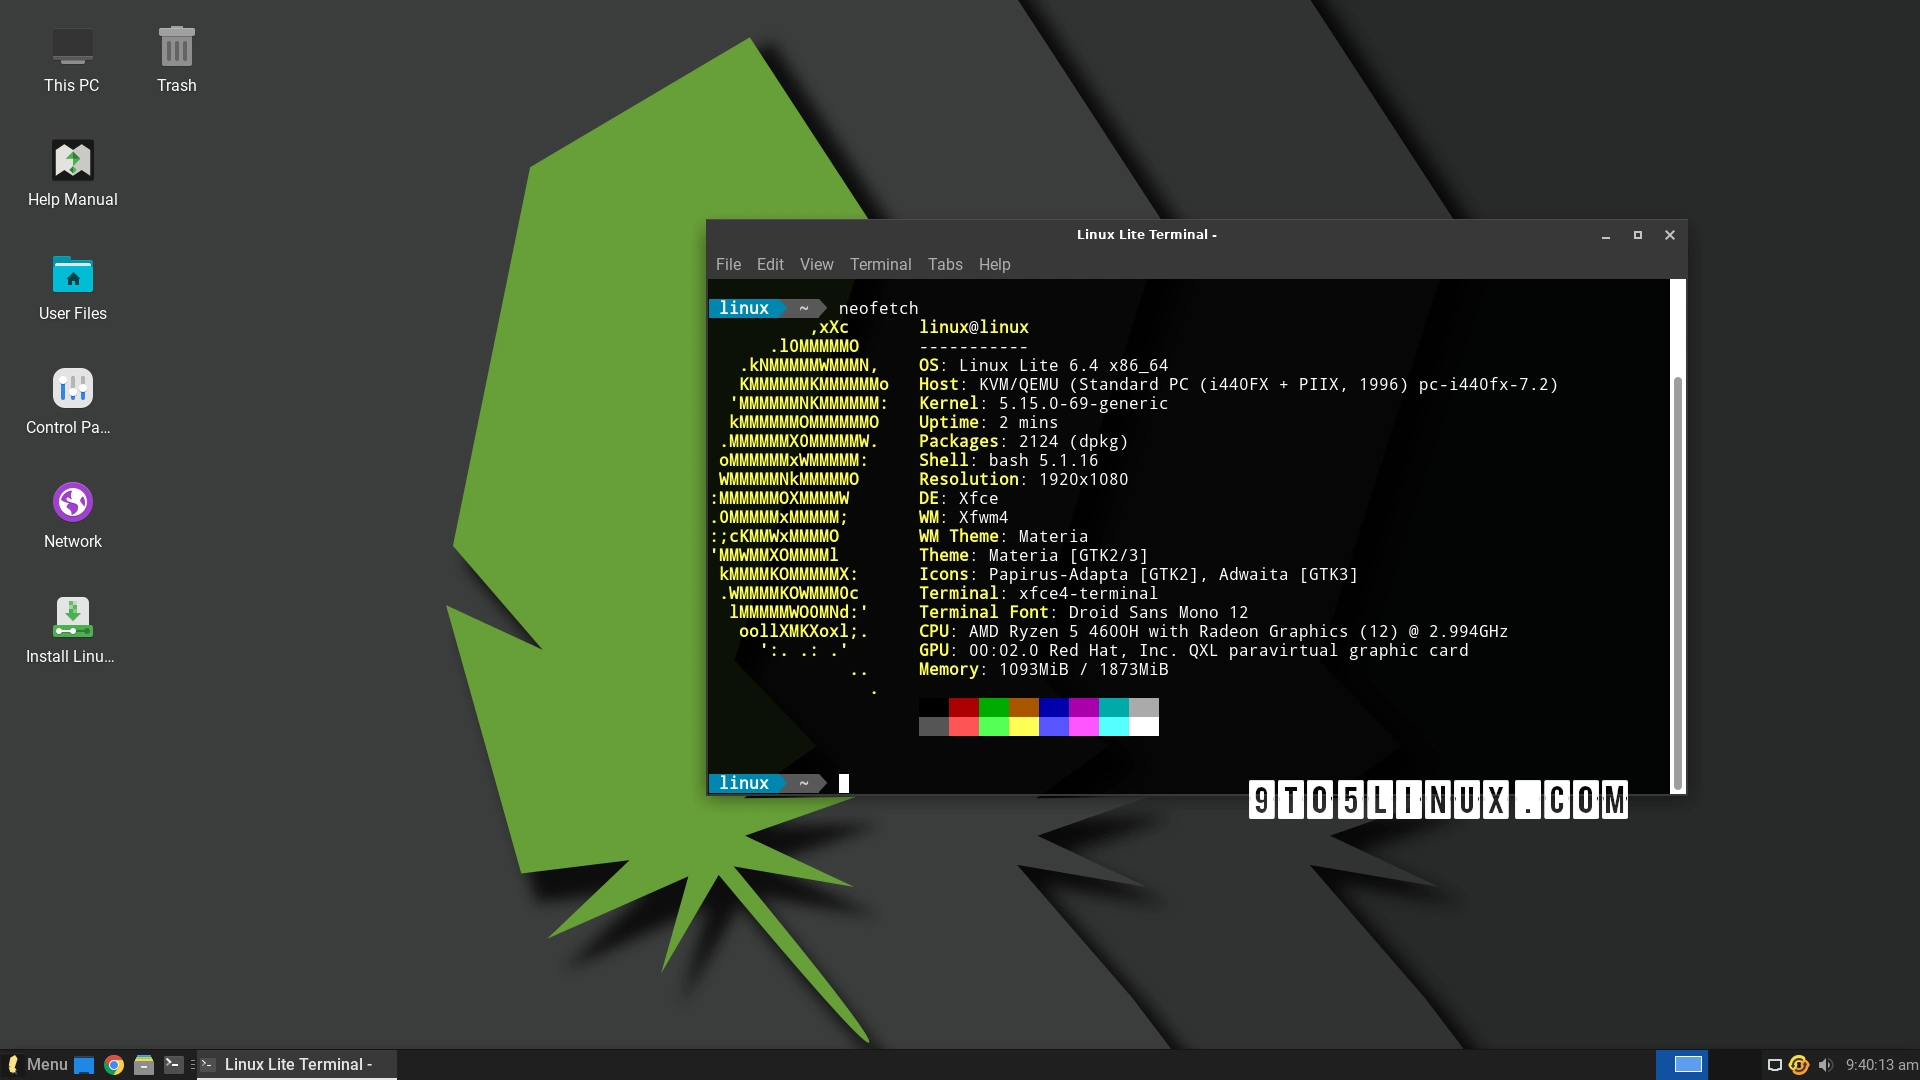 Linux Lite 6.4 Officially Released, Based on Ubuntu 22.04.2 LTS